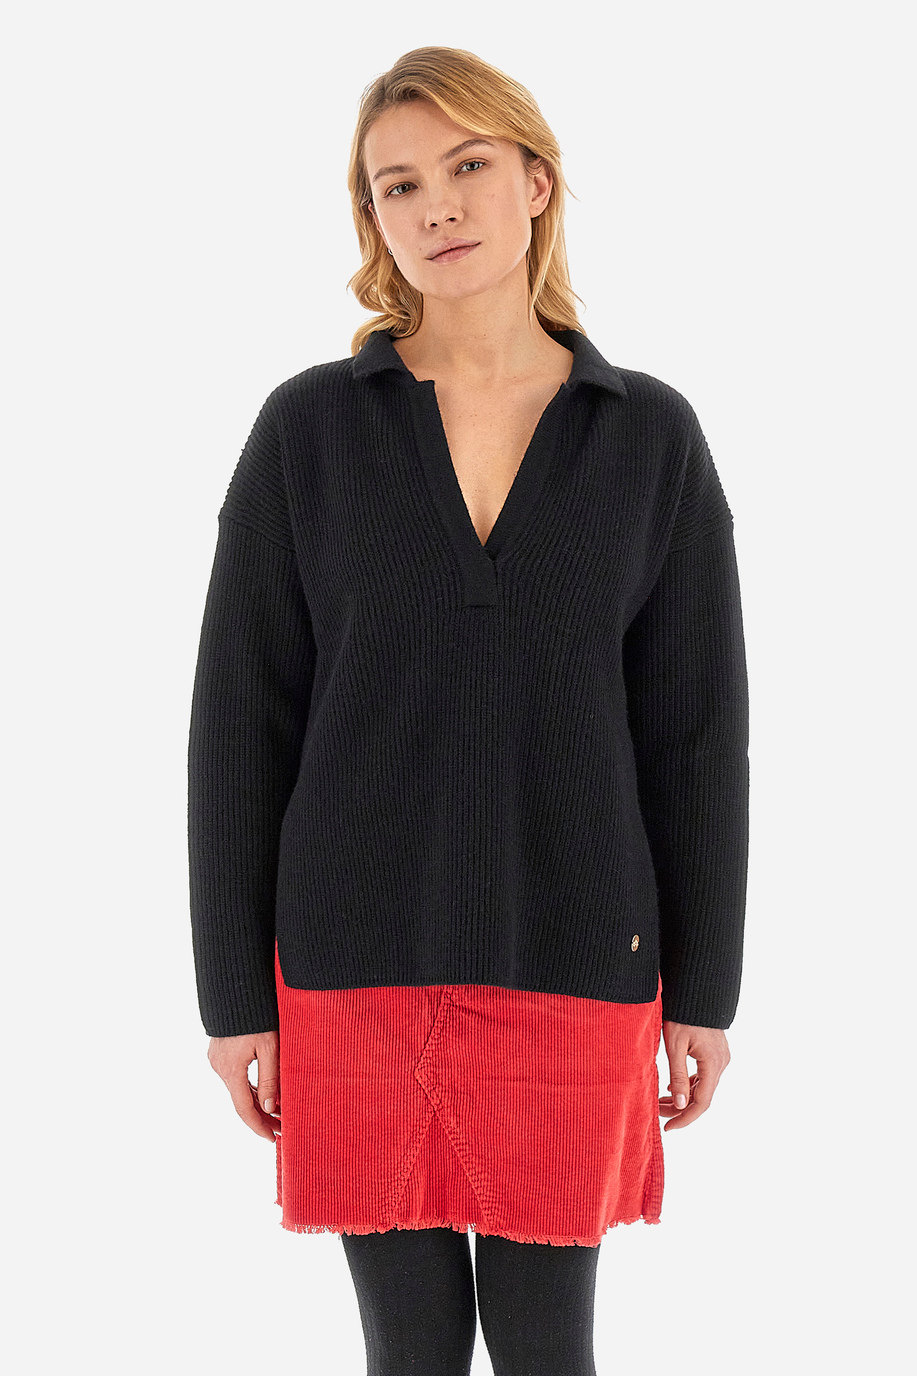 Polo shirt in regular fit - Wilma - Knitwear | La Martina - Official Online Shop